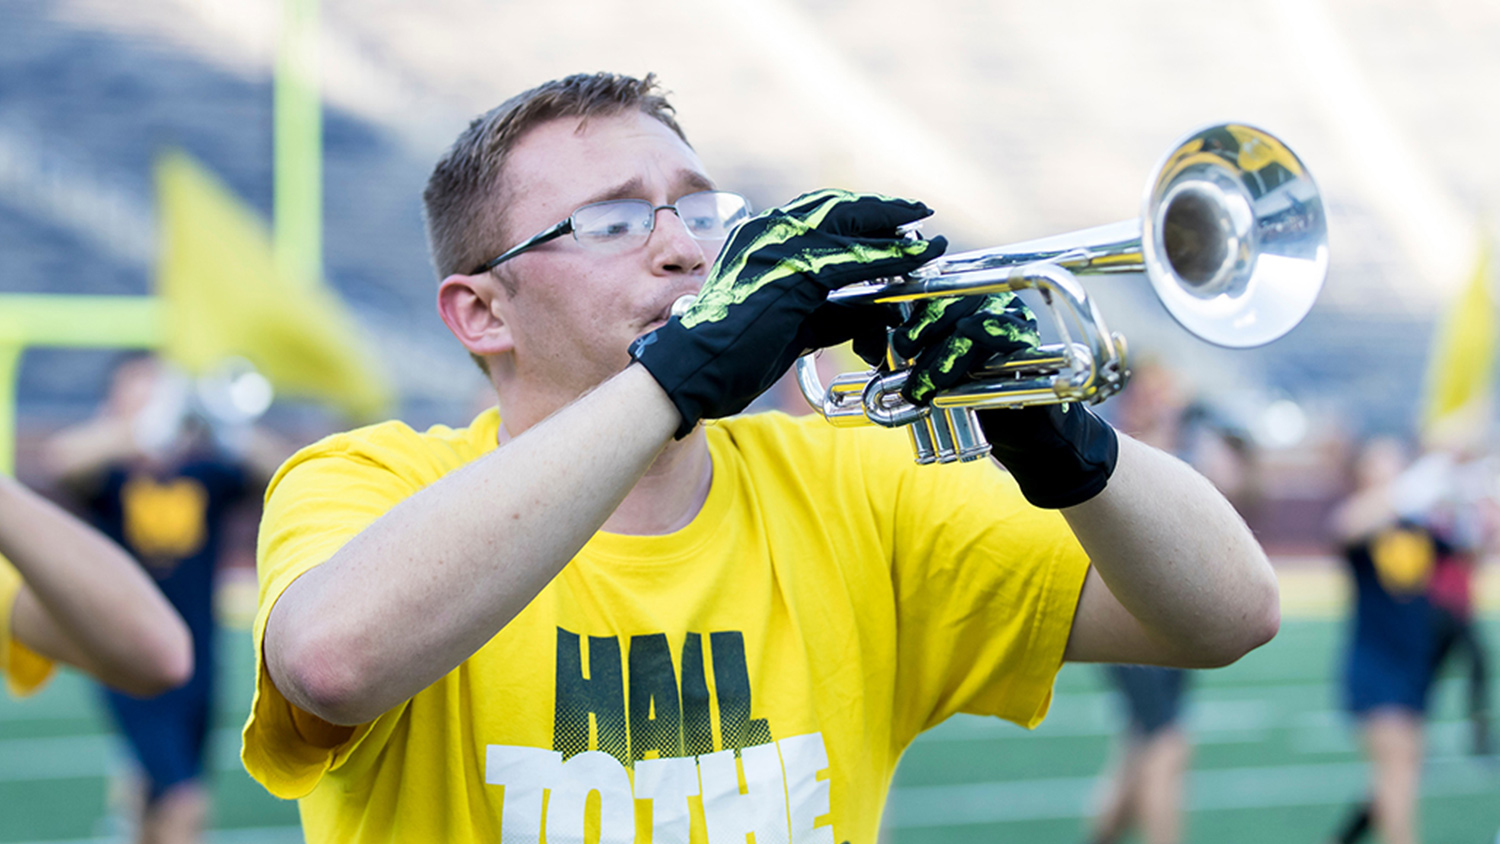 Mark Stout | Michigan Marching Band and High Power Rifle Shooter